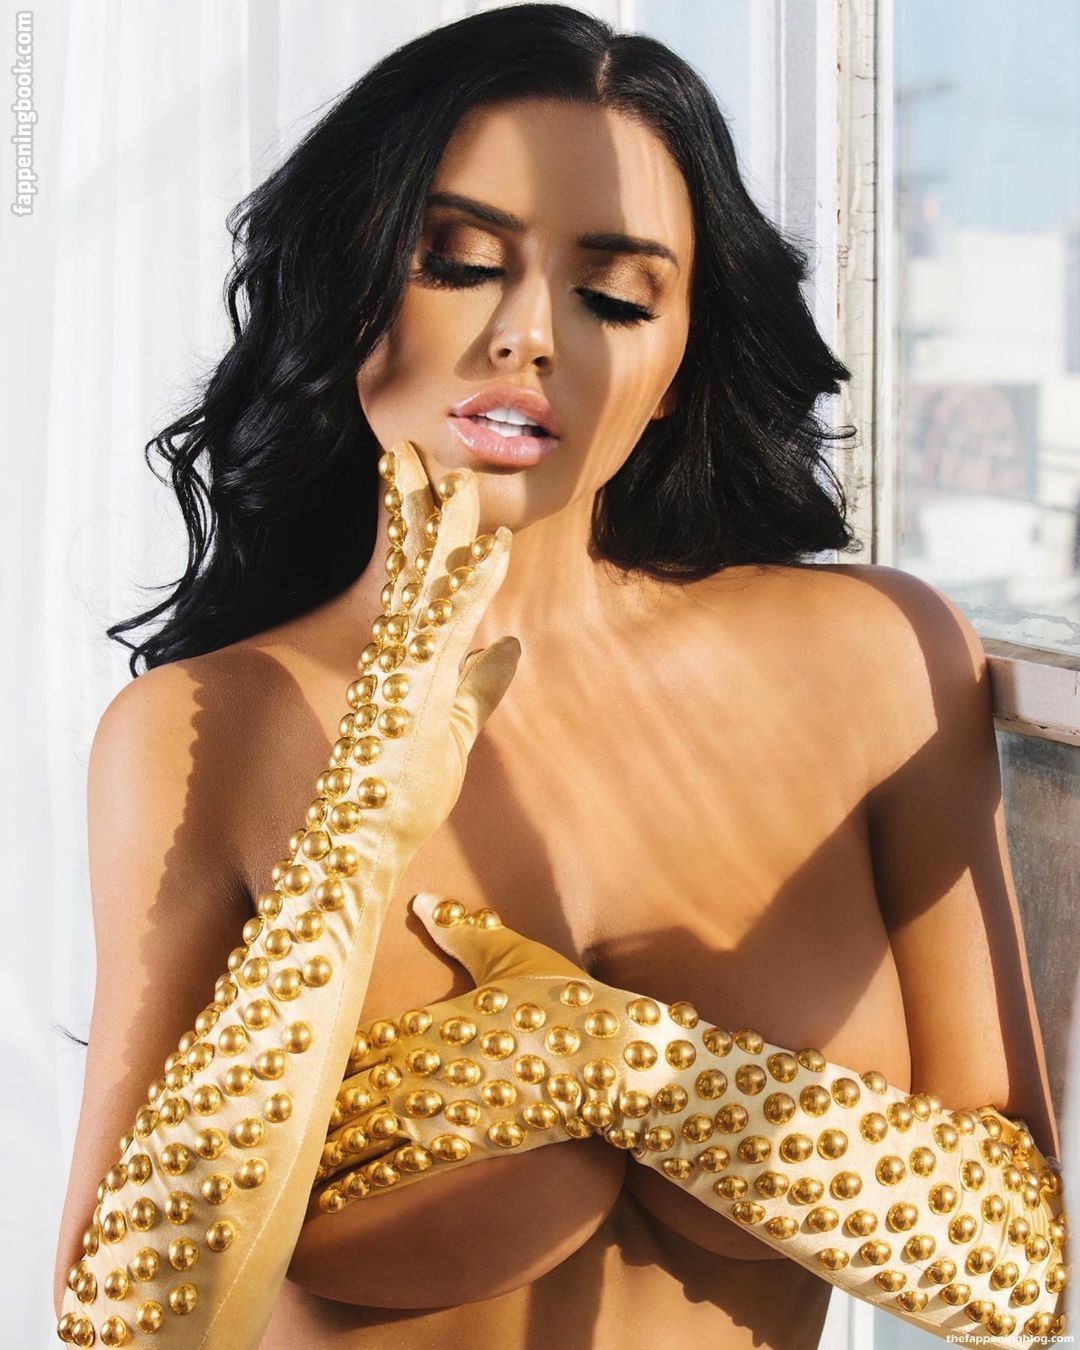 Abigail ratchford leaked nudes